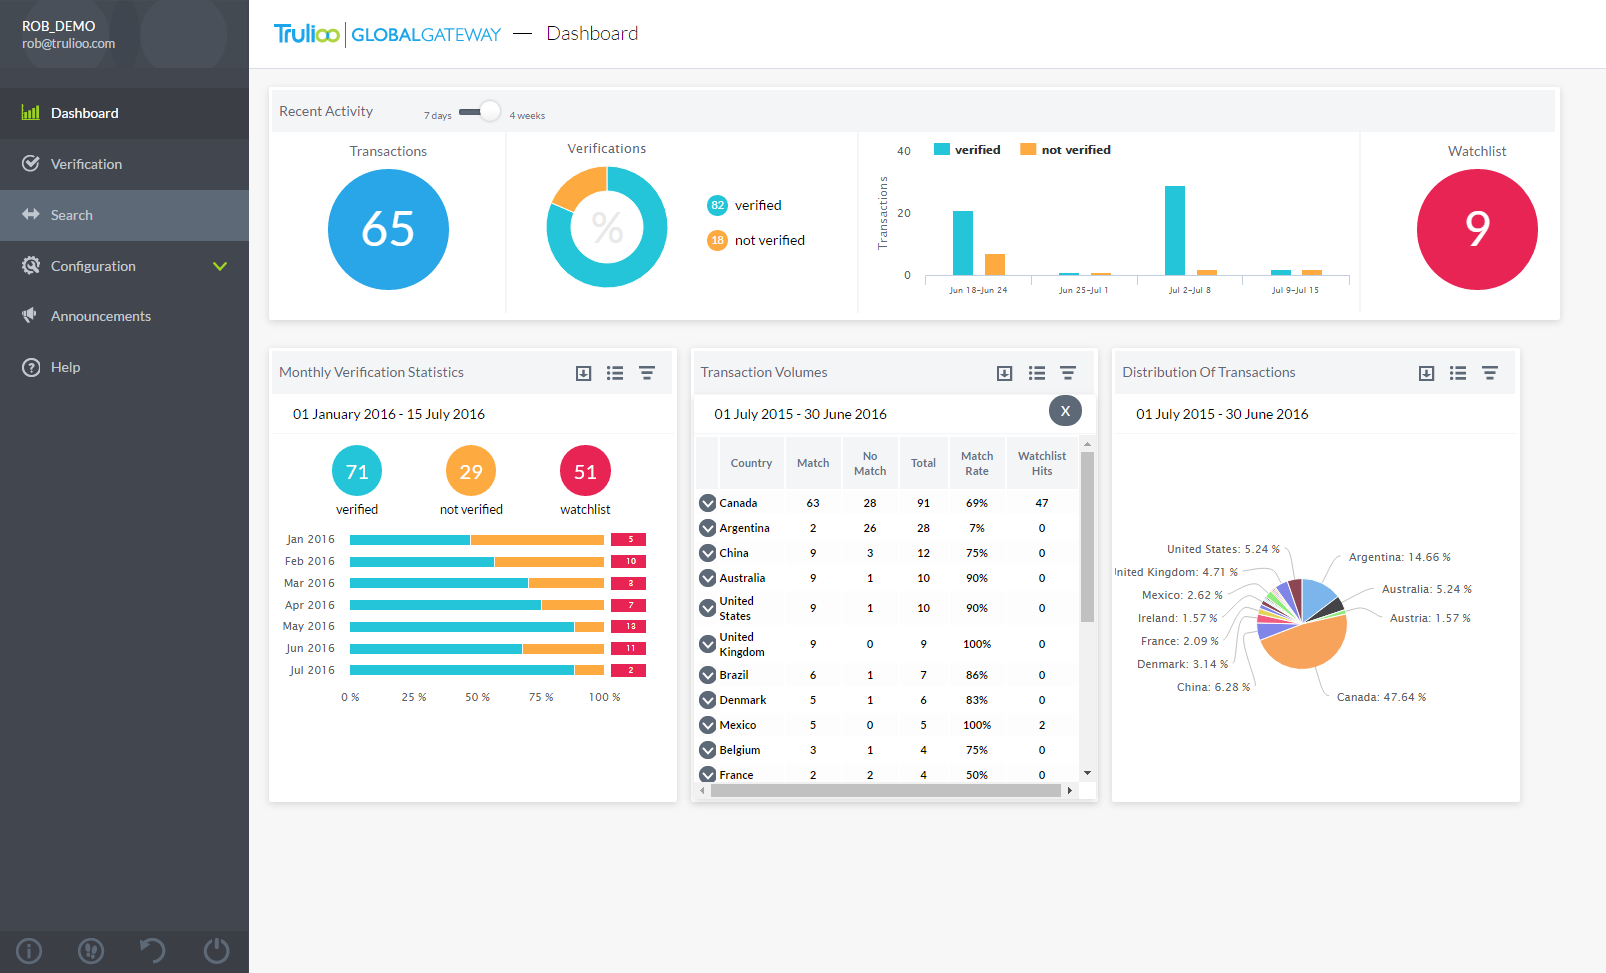 Trulioo's GlobalGateway offers extensive data and analytics for reporting and audits